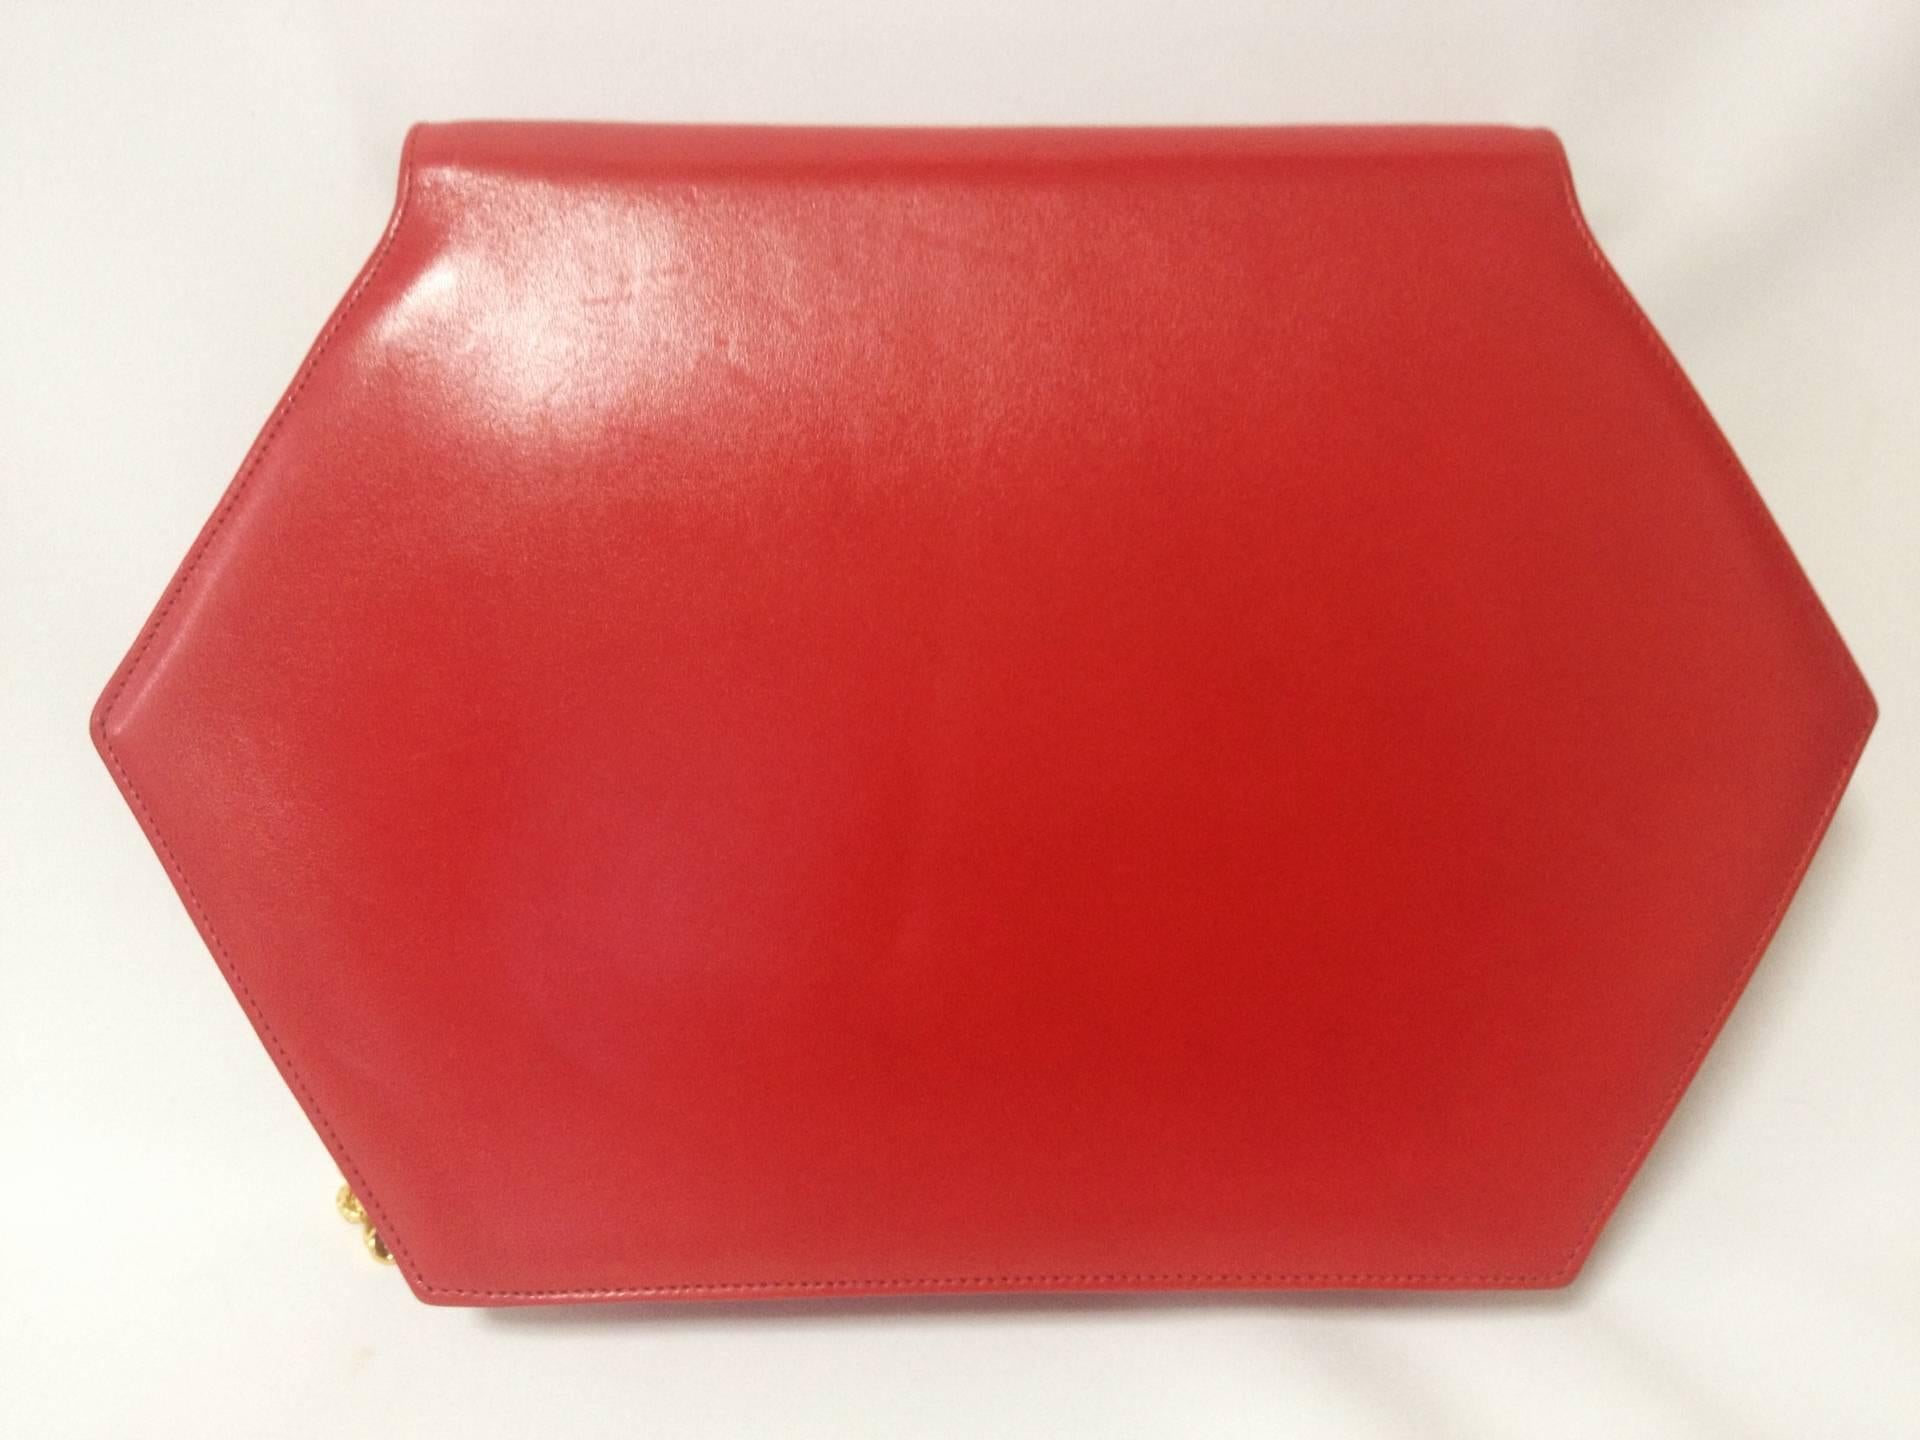 Women's Vintage Nina Ricci red leather hexagon shape clutch shoulder bag with large bow